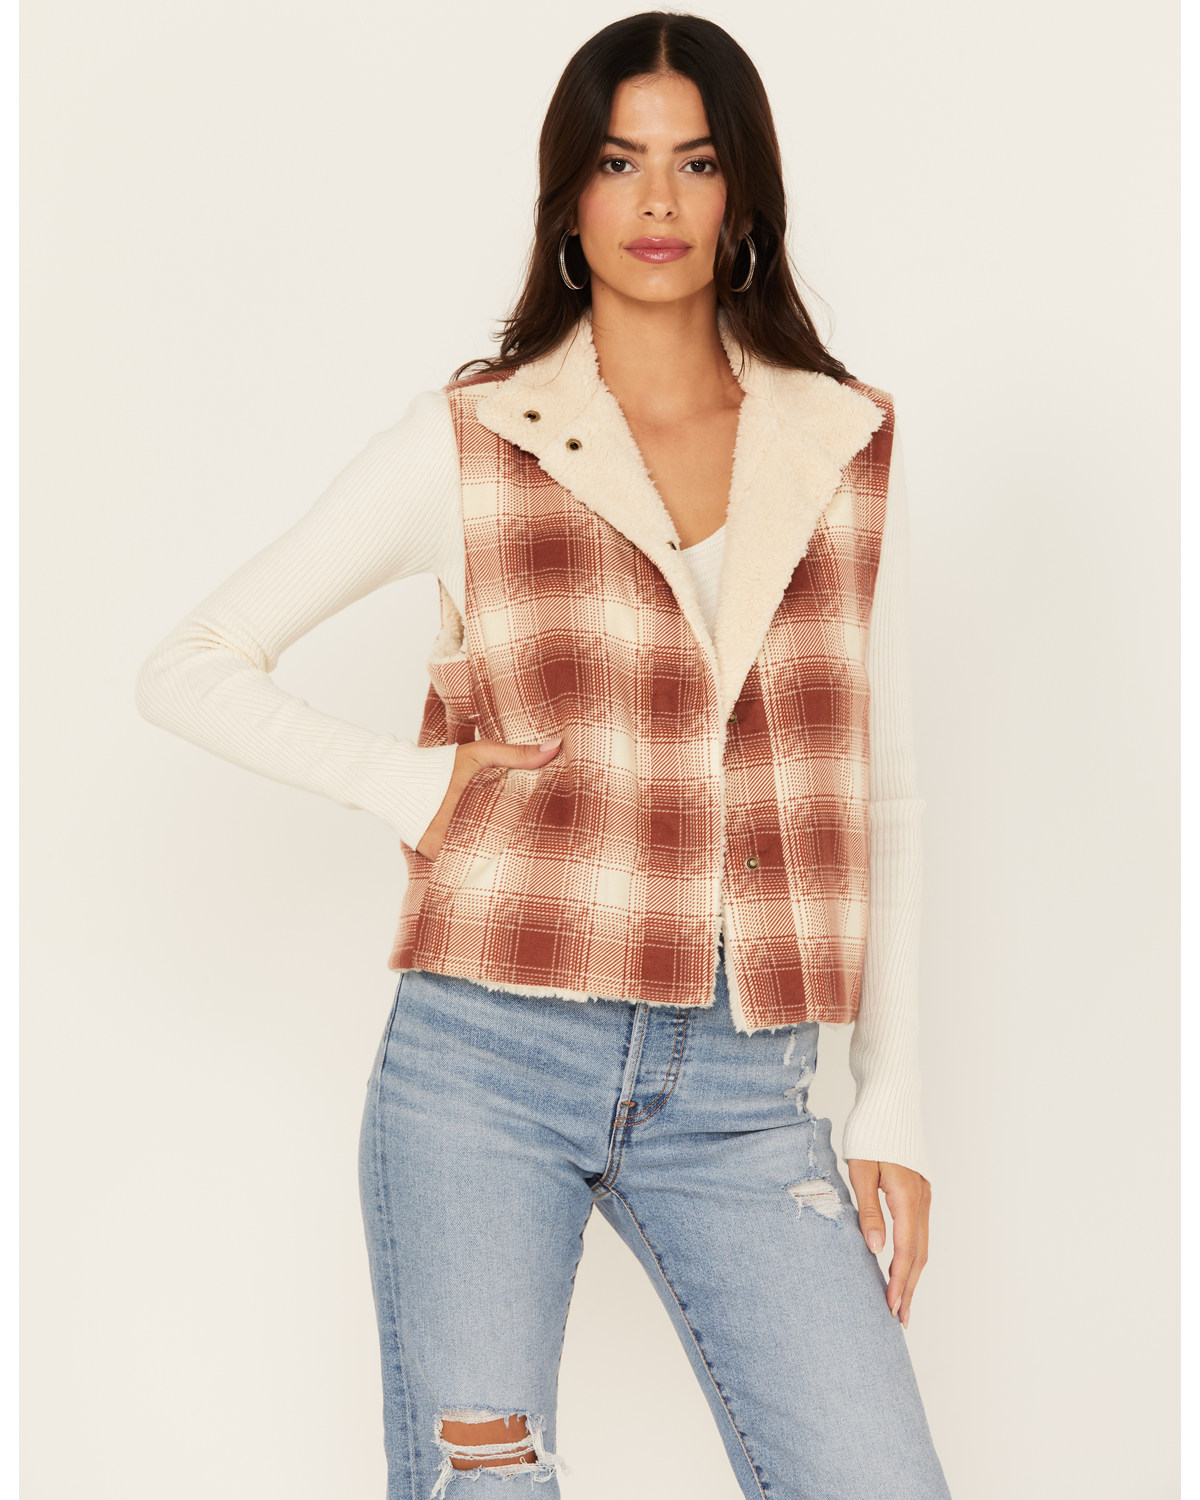 Cleo + Wolf Women's Alice Reversible Sherpa and Plaid Vest